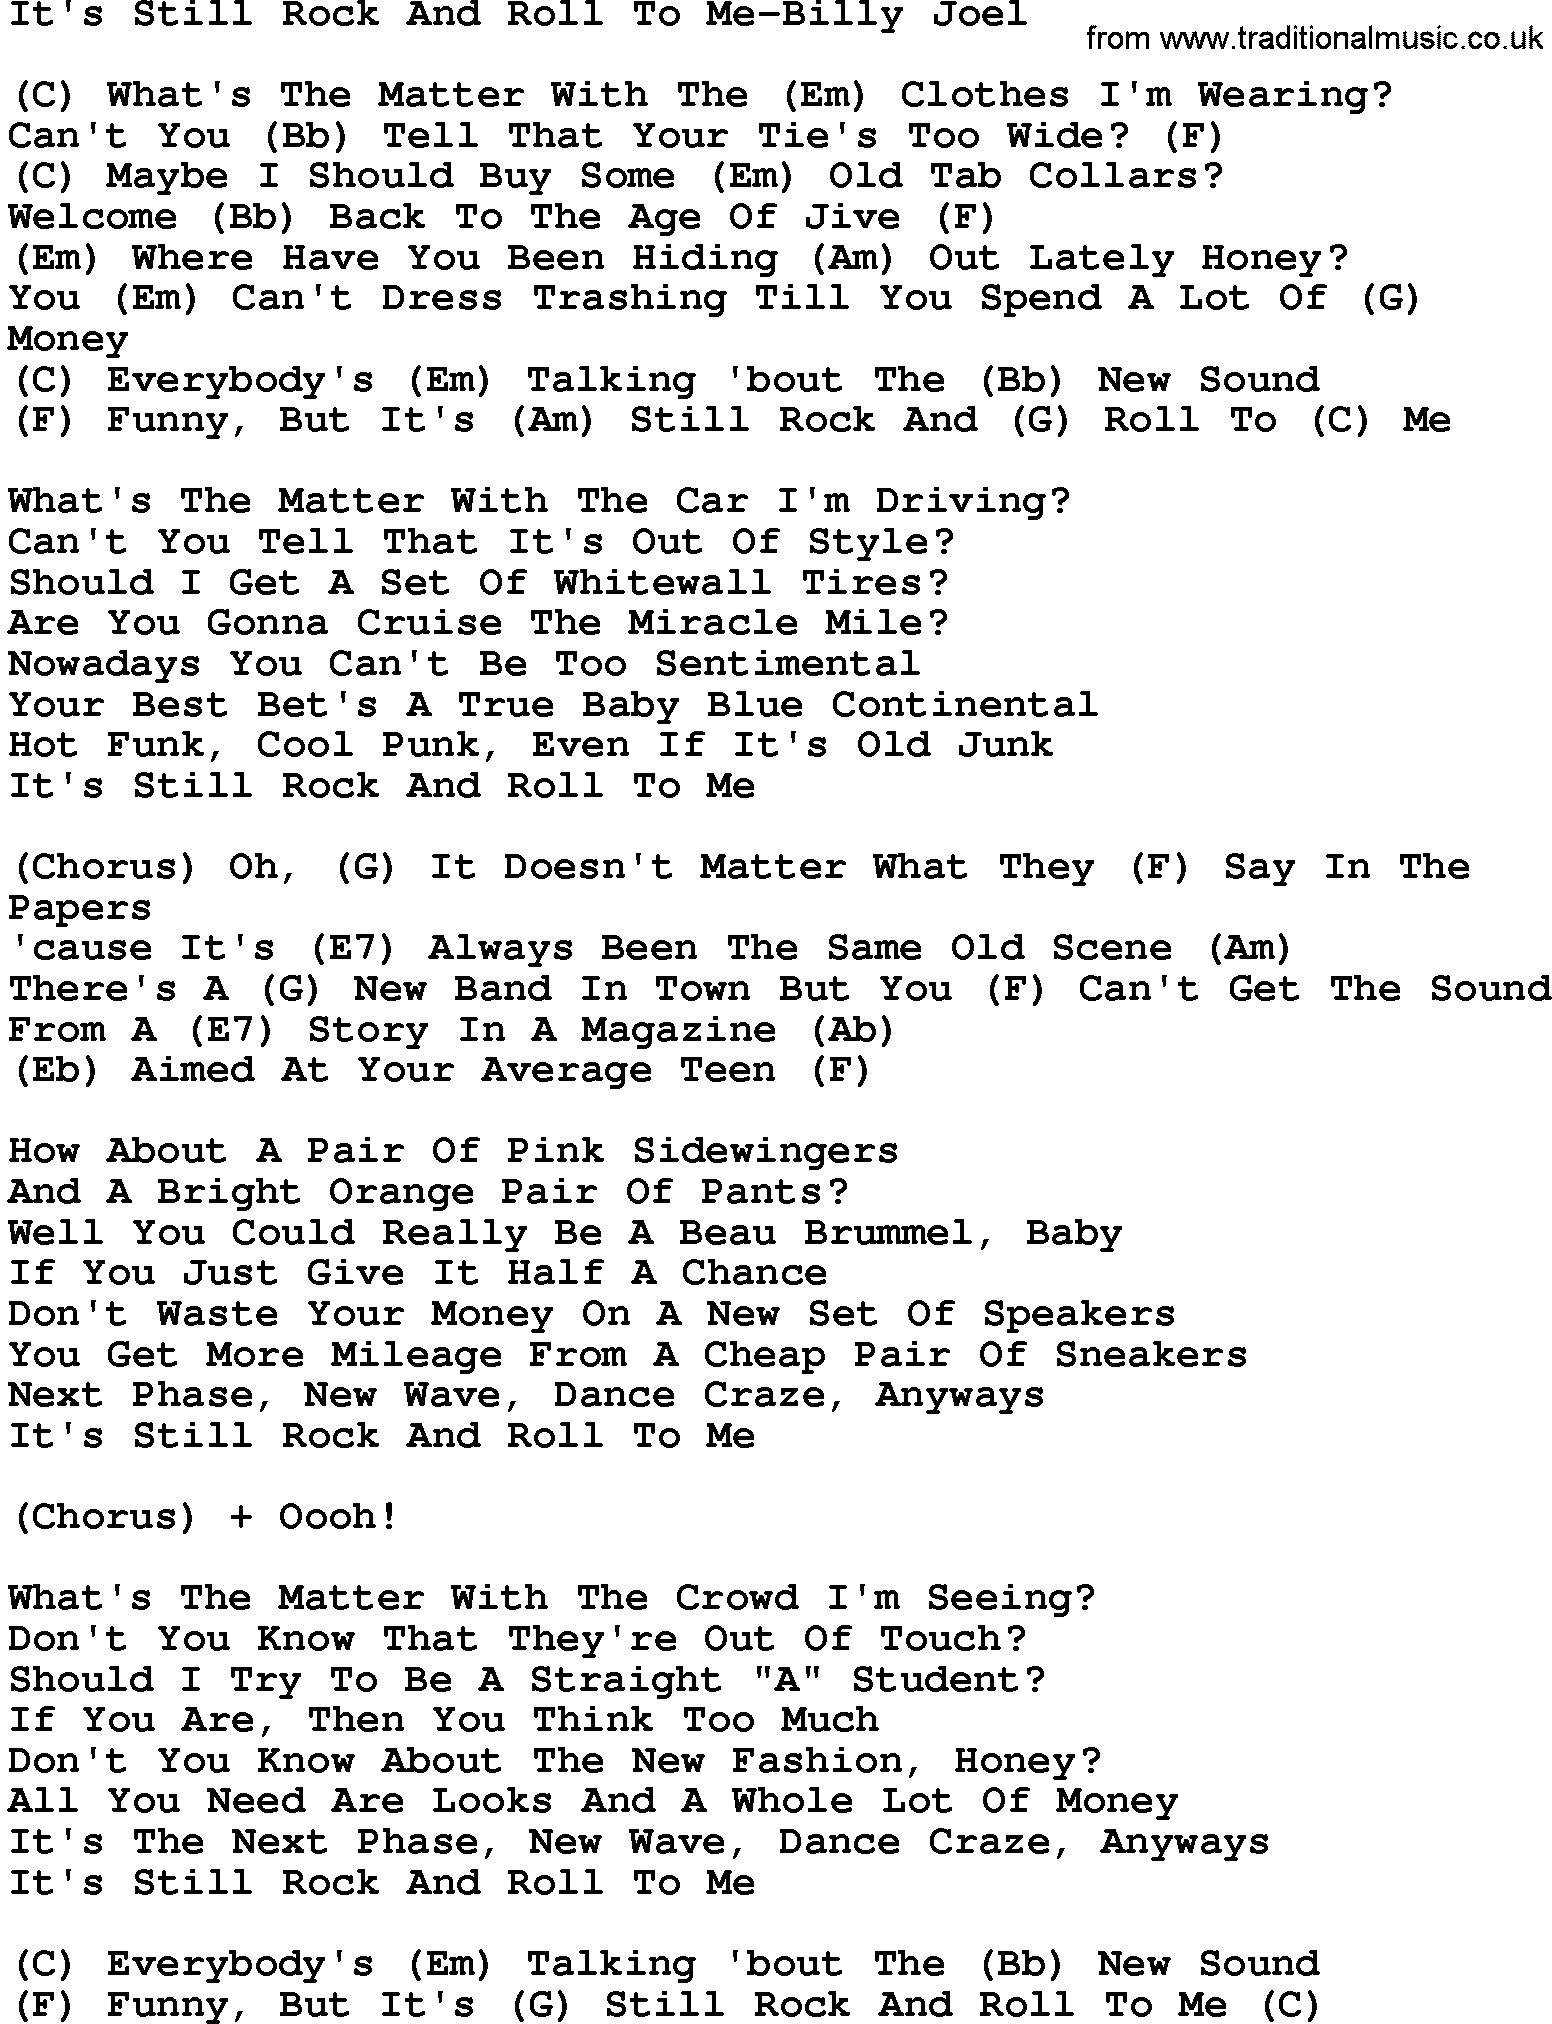 Country music song: It's Still Rock And Roll To Me-Billy Joel lyrics and chords